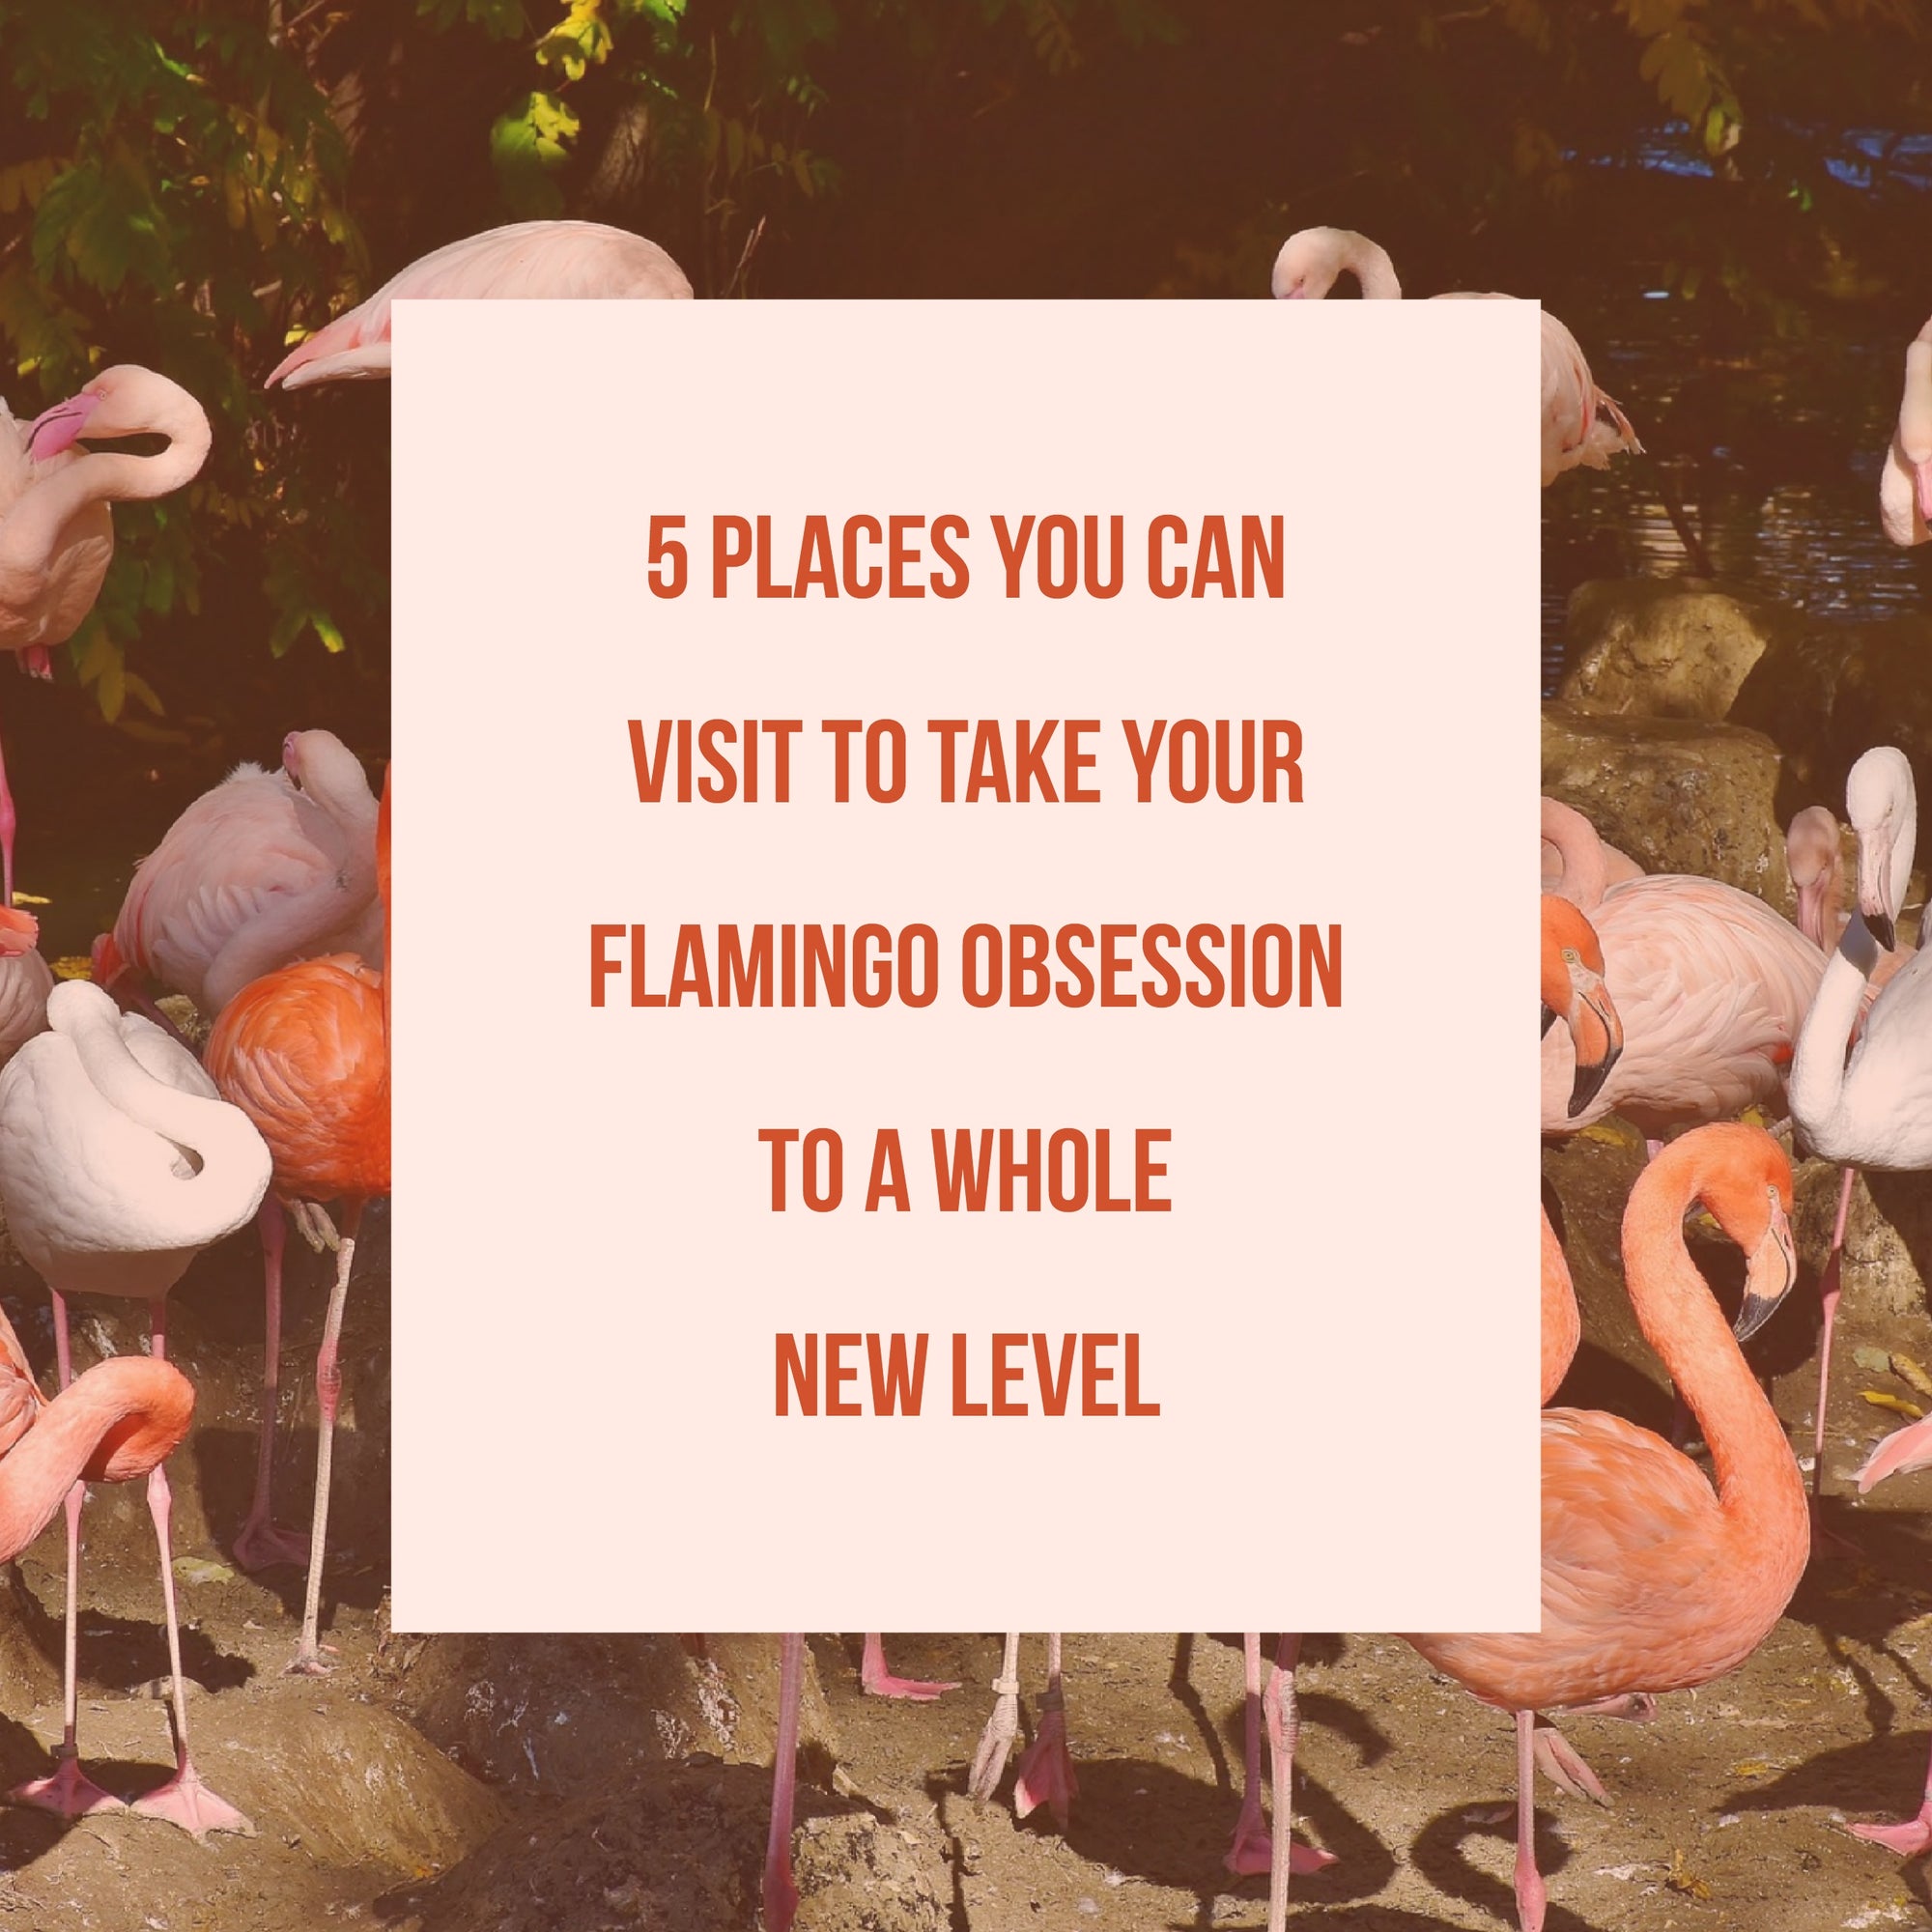 5 Sites To take your Flamingo obsession to a whole new level